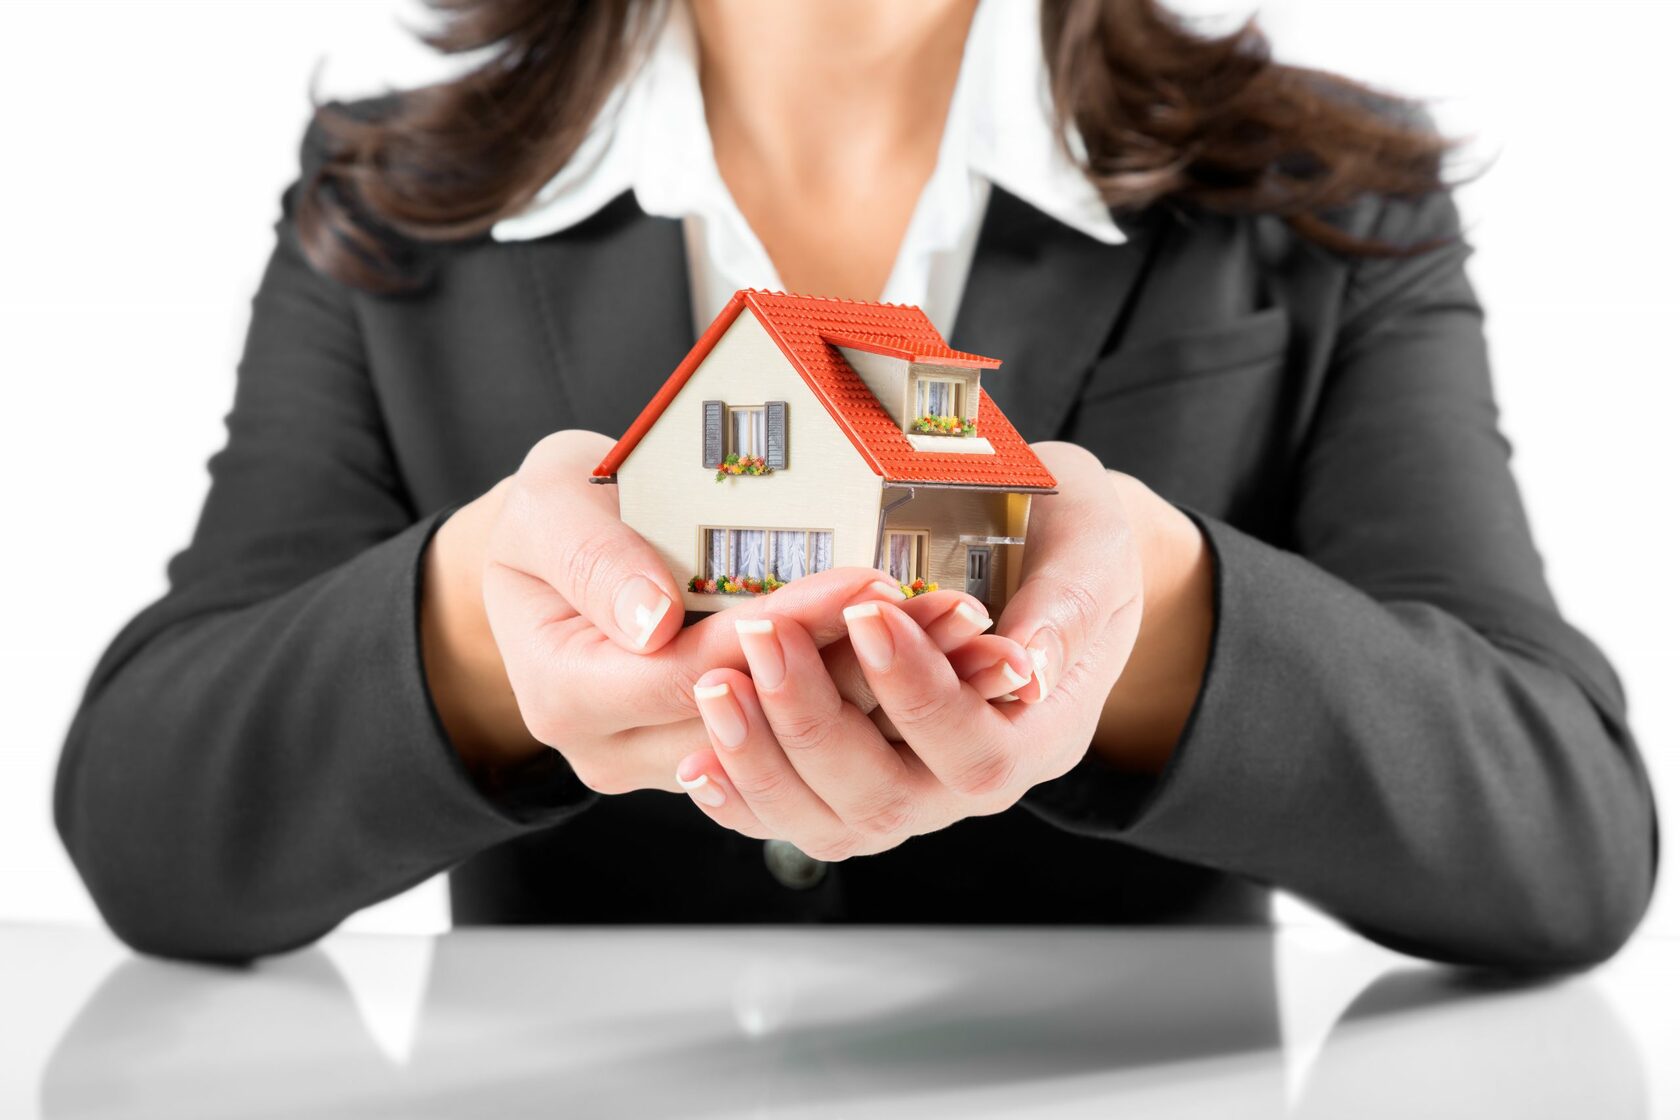 Homeownership Trust: Your Reliable Partner in the Search and Purchase of Real Estate